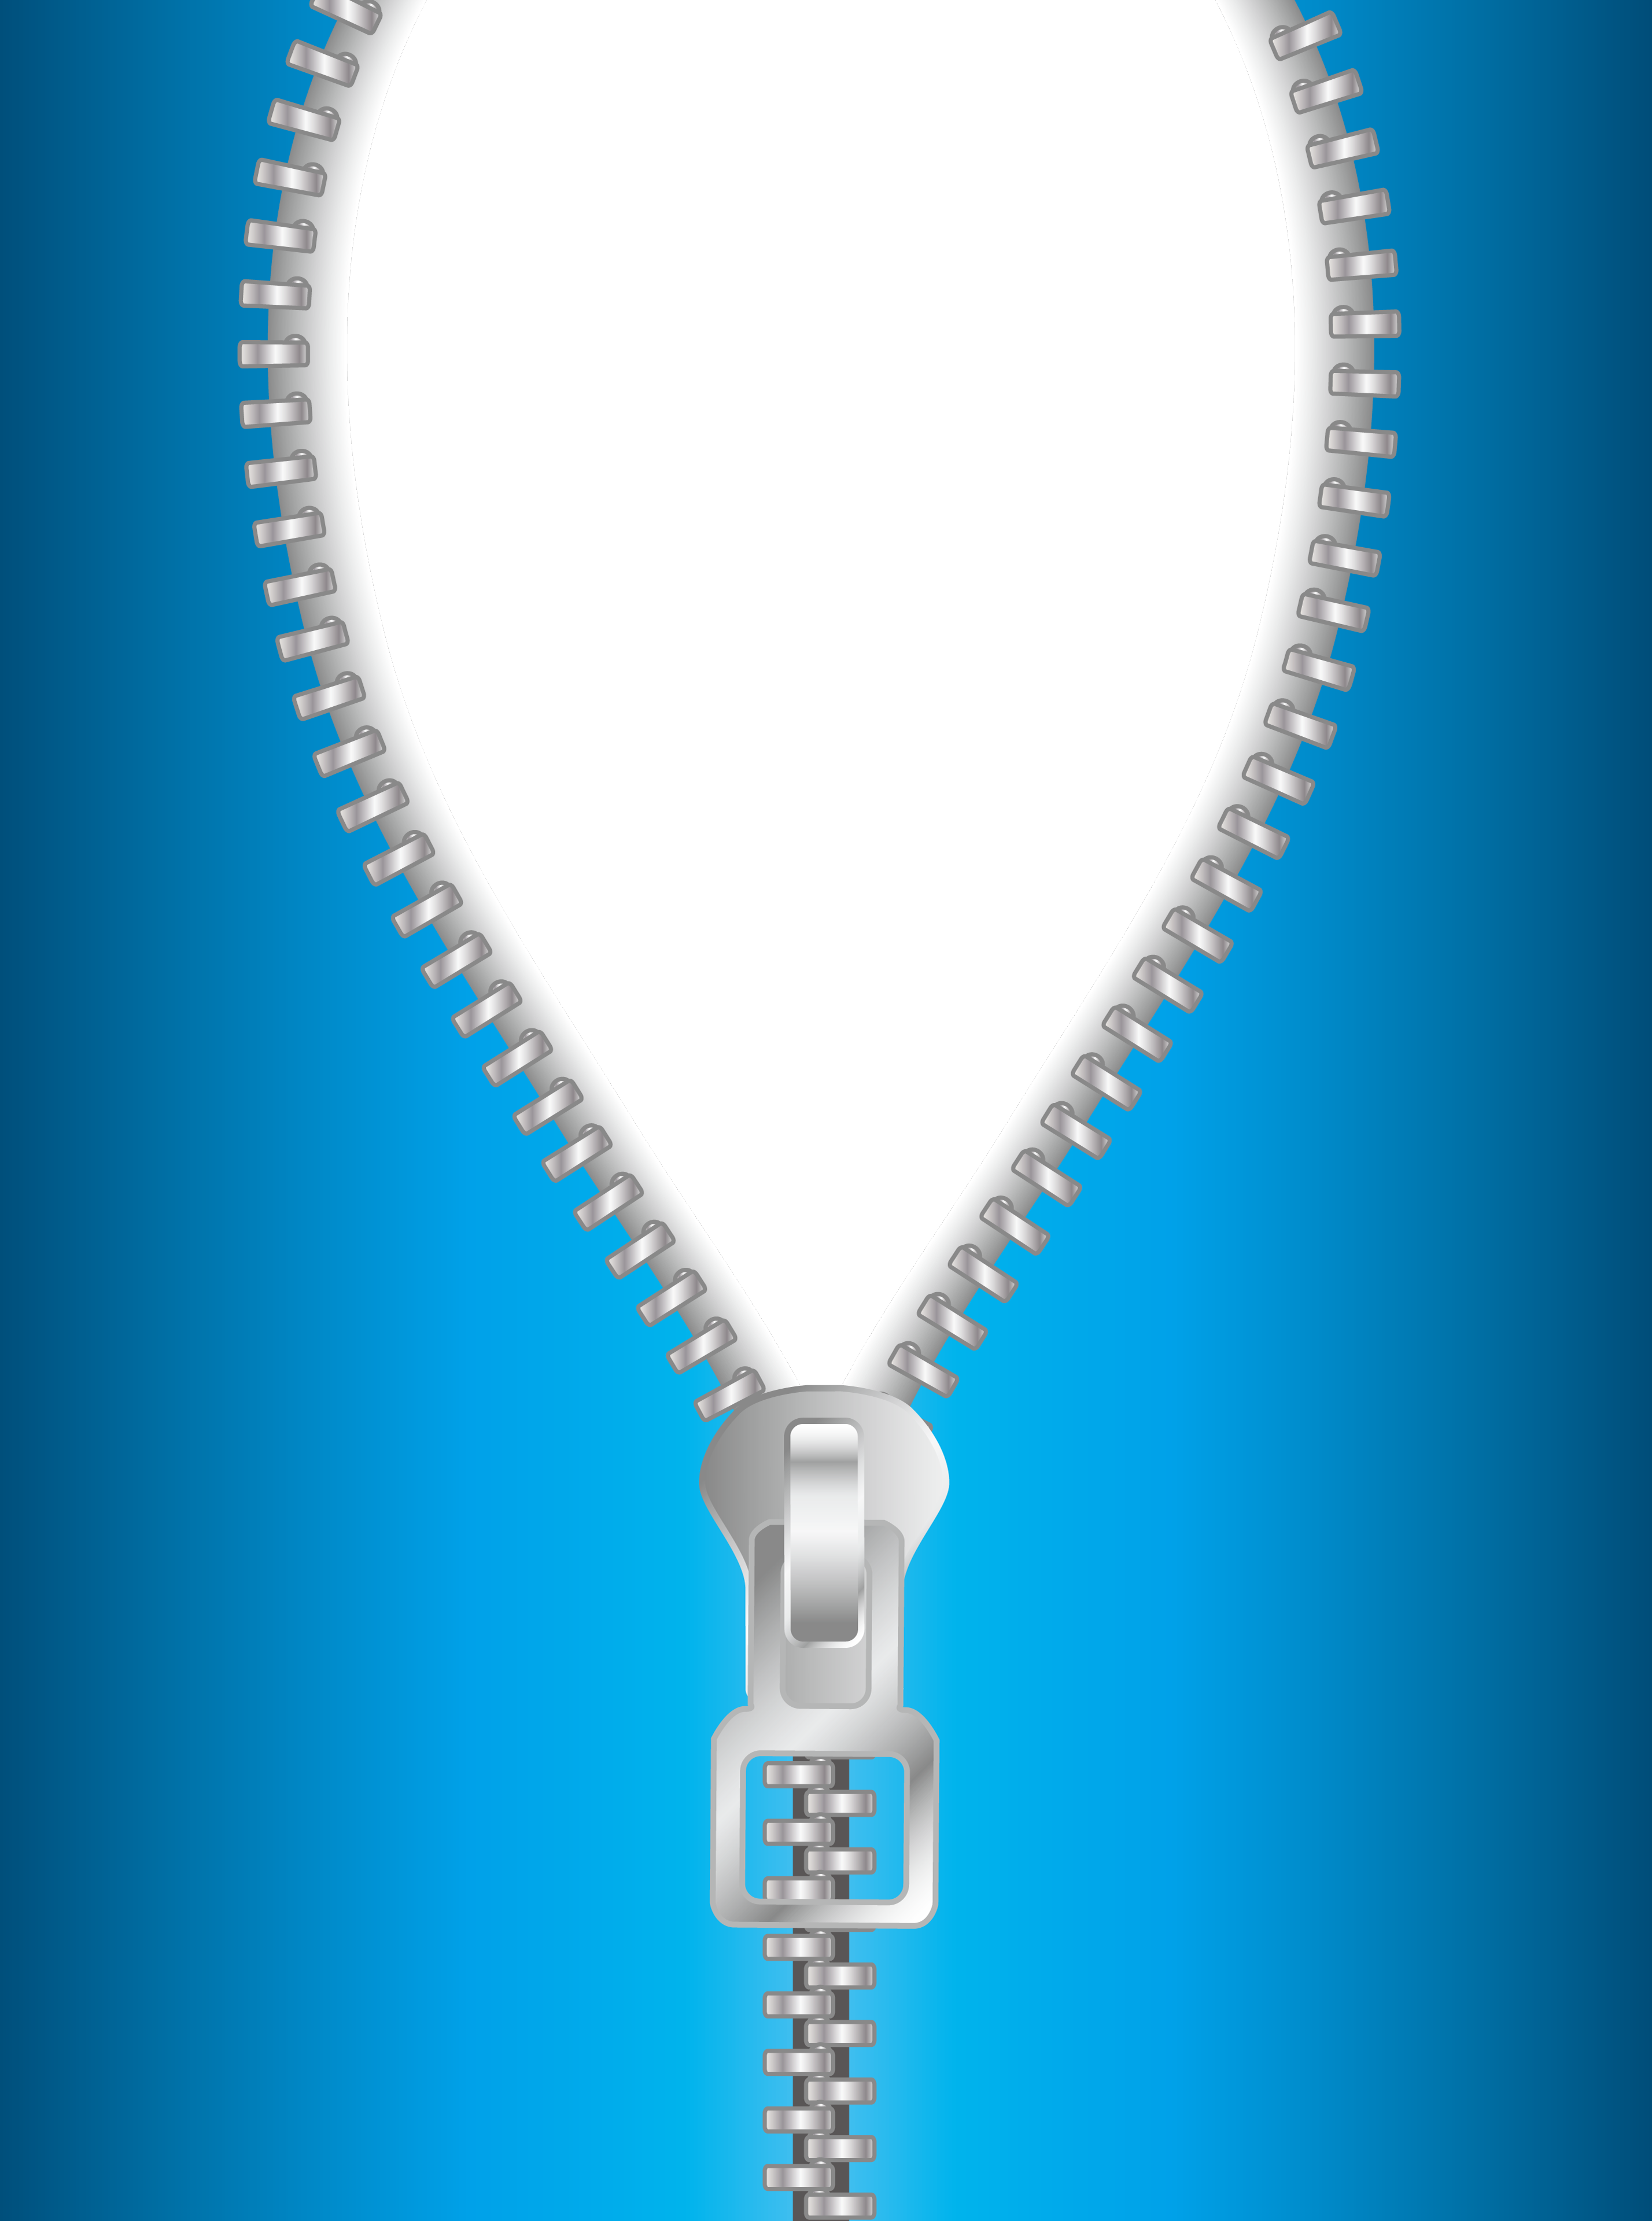 Zipper clipart chain. S png image purepng